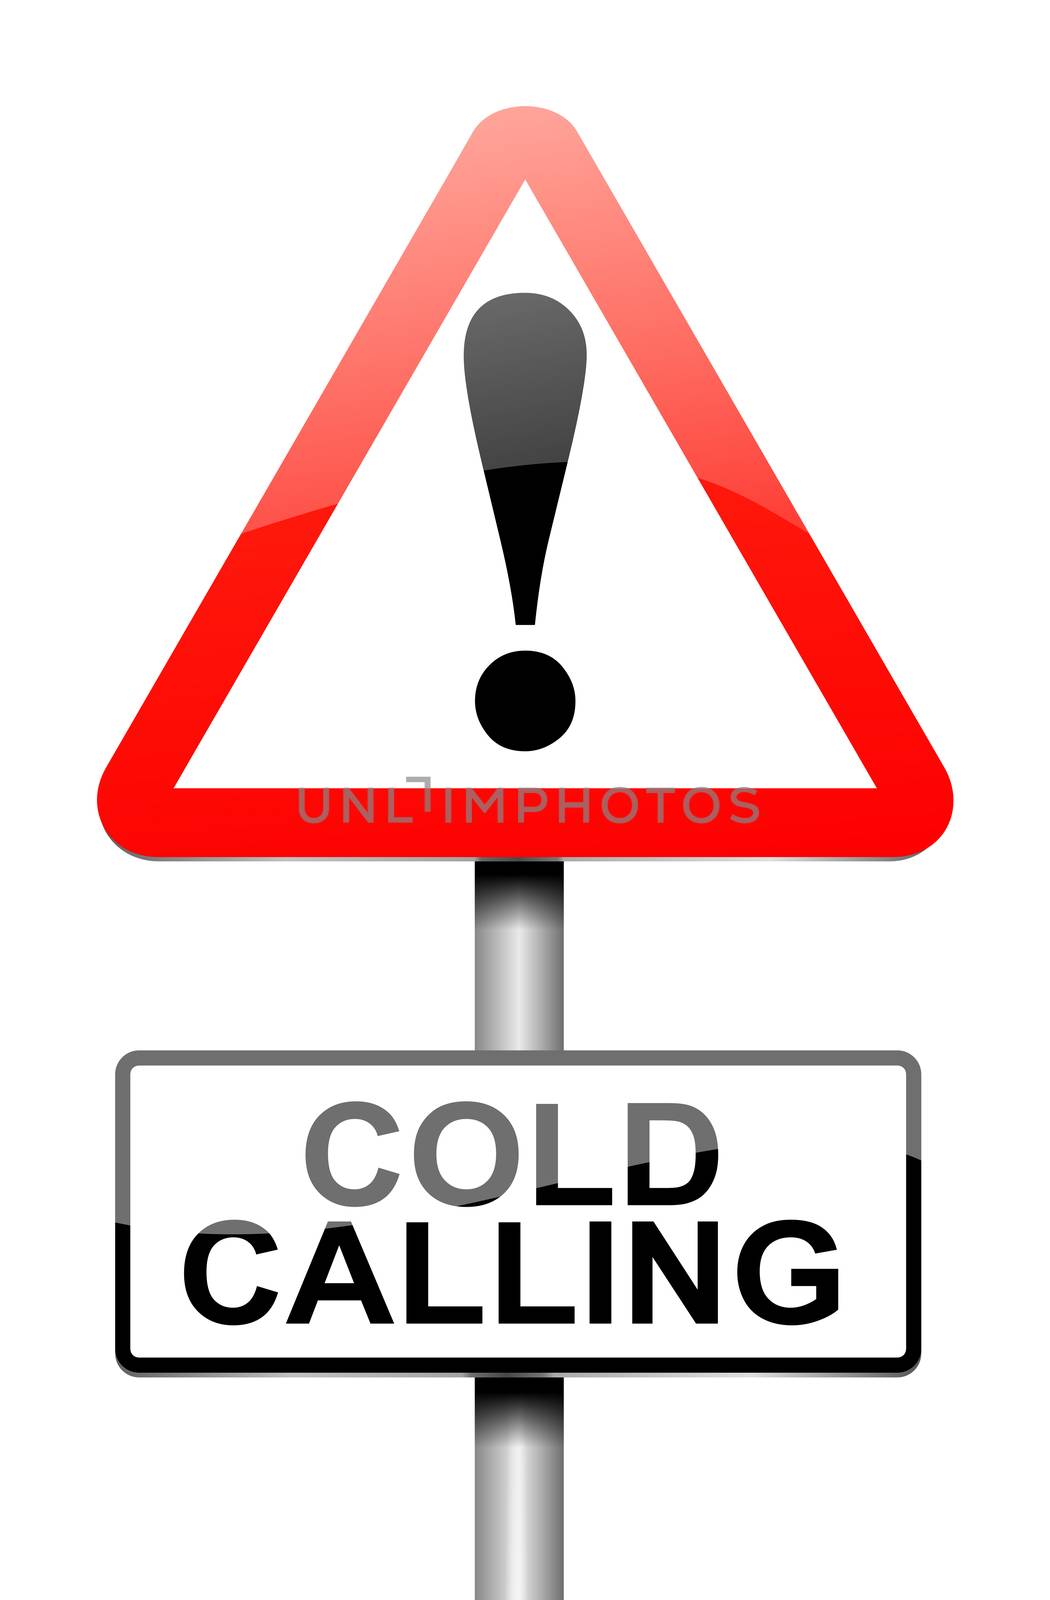 Cold calling warning. by 72soul